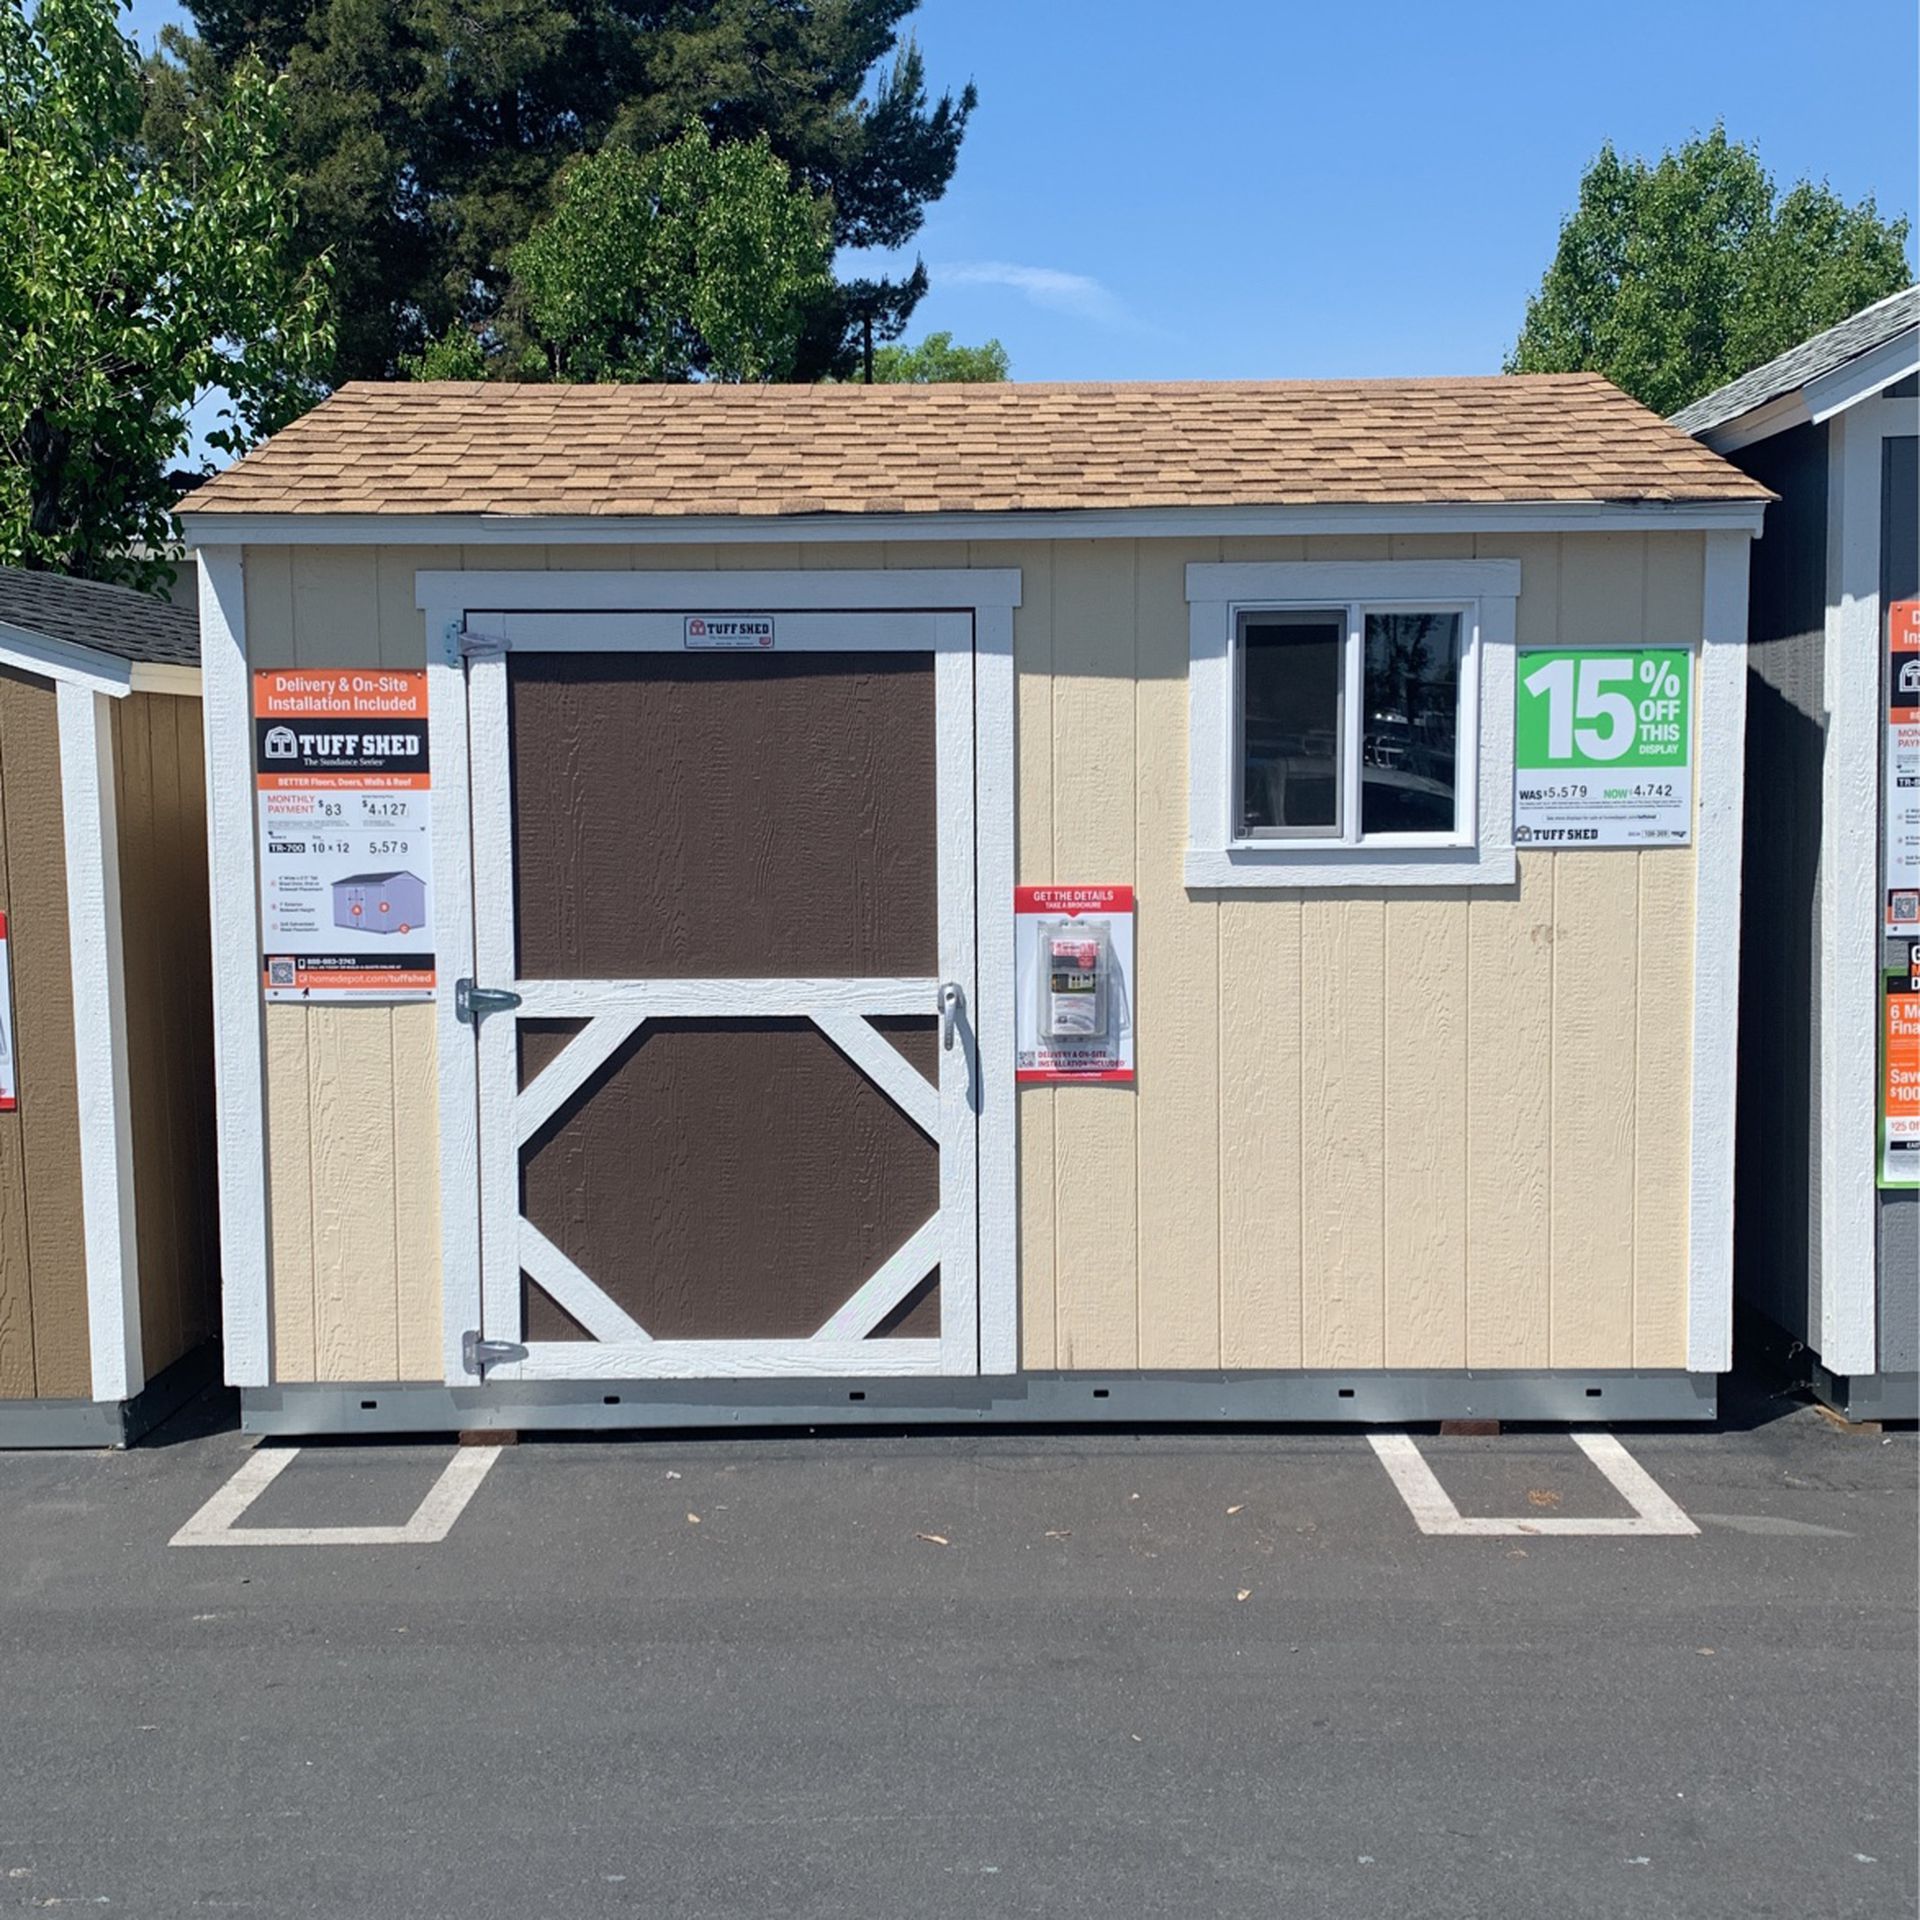 Tuff Shed Sundance TR-700 10x12 Was $5579 Now $4,742 15% Off Financing Available!